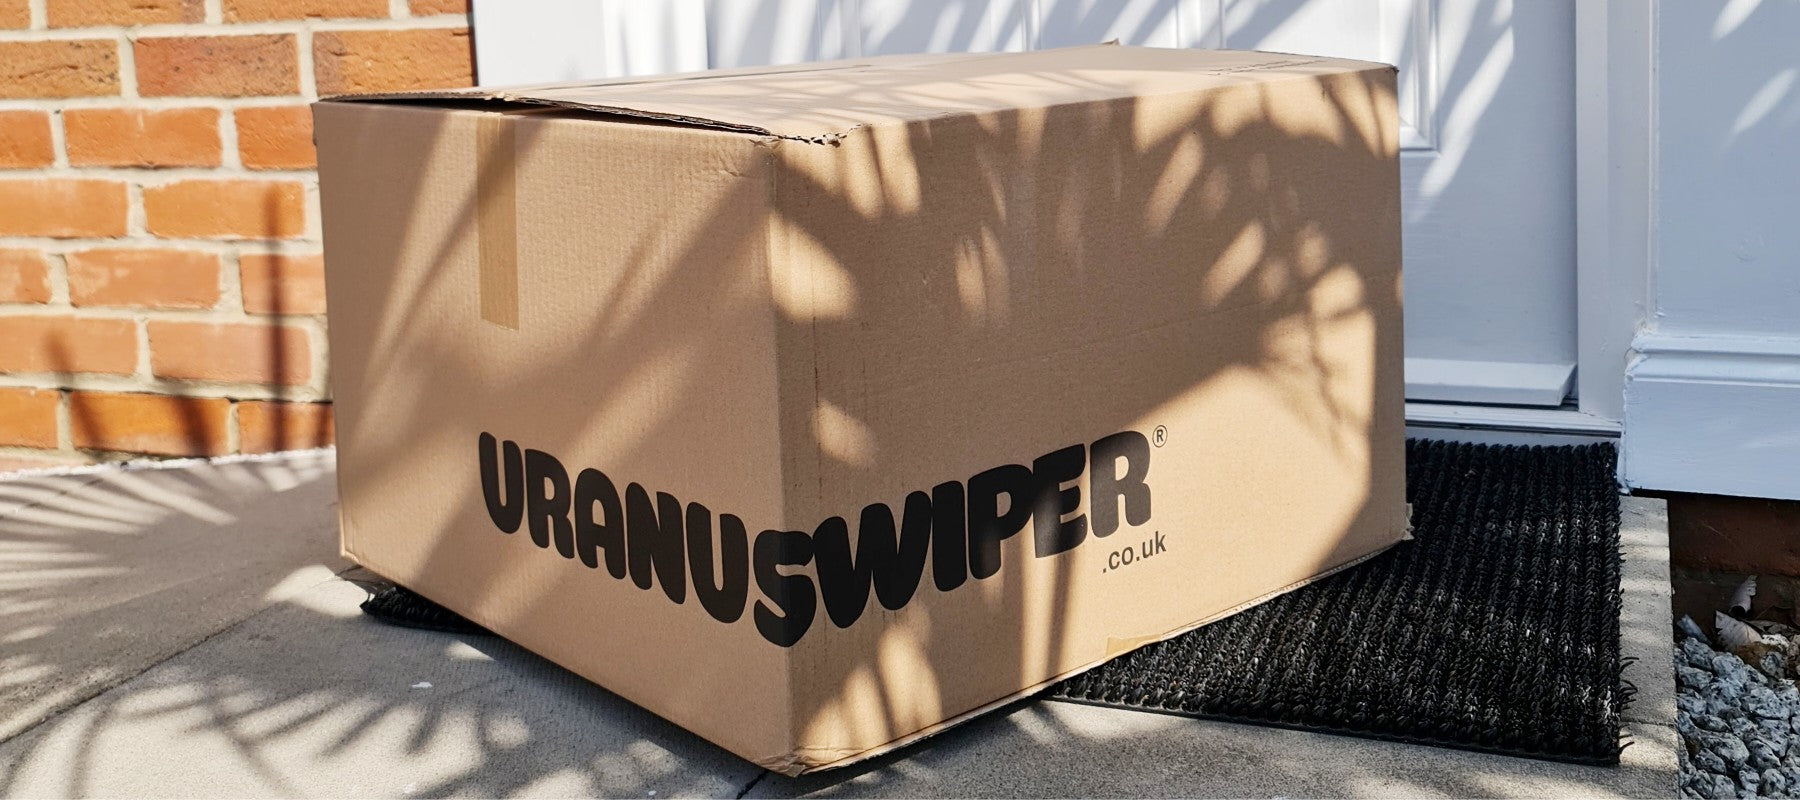 Box of Uranus Wiper Subscribe and save delivery to doorstep